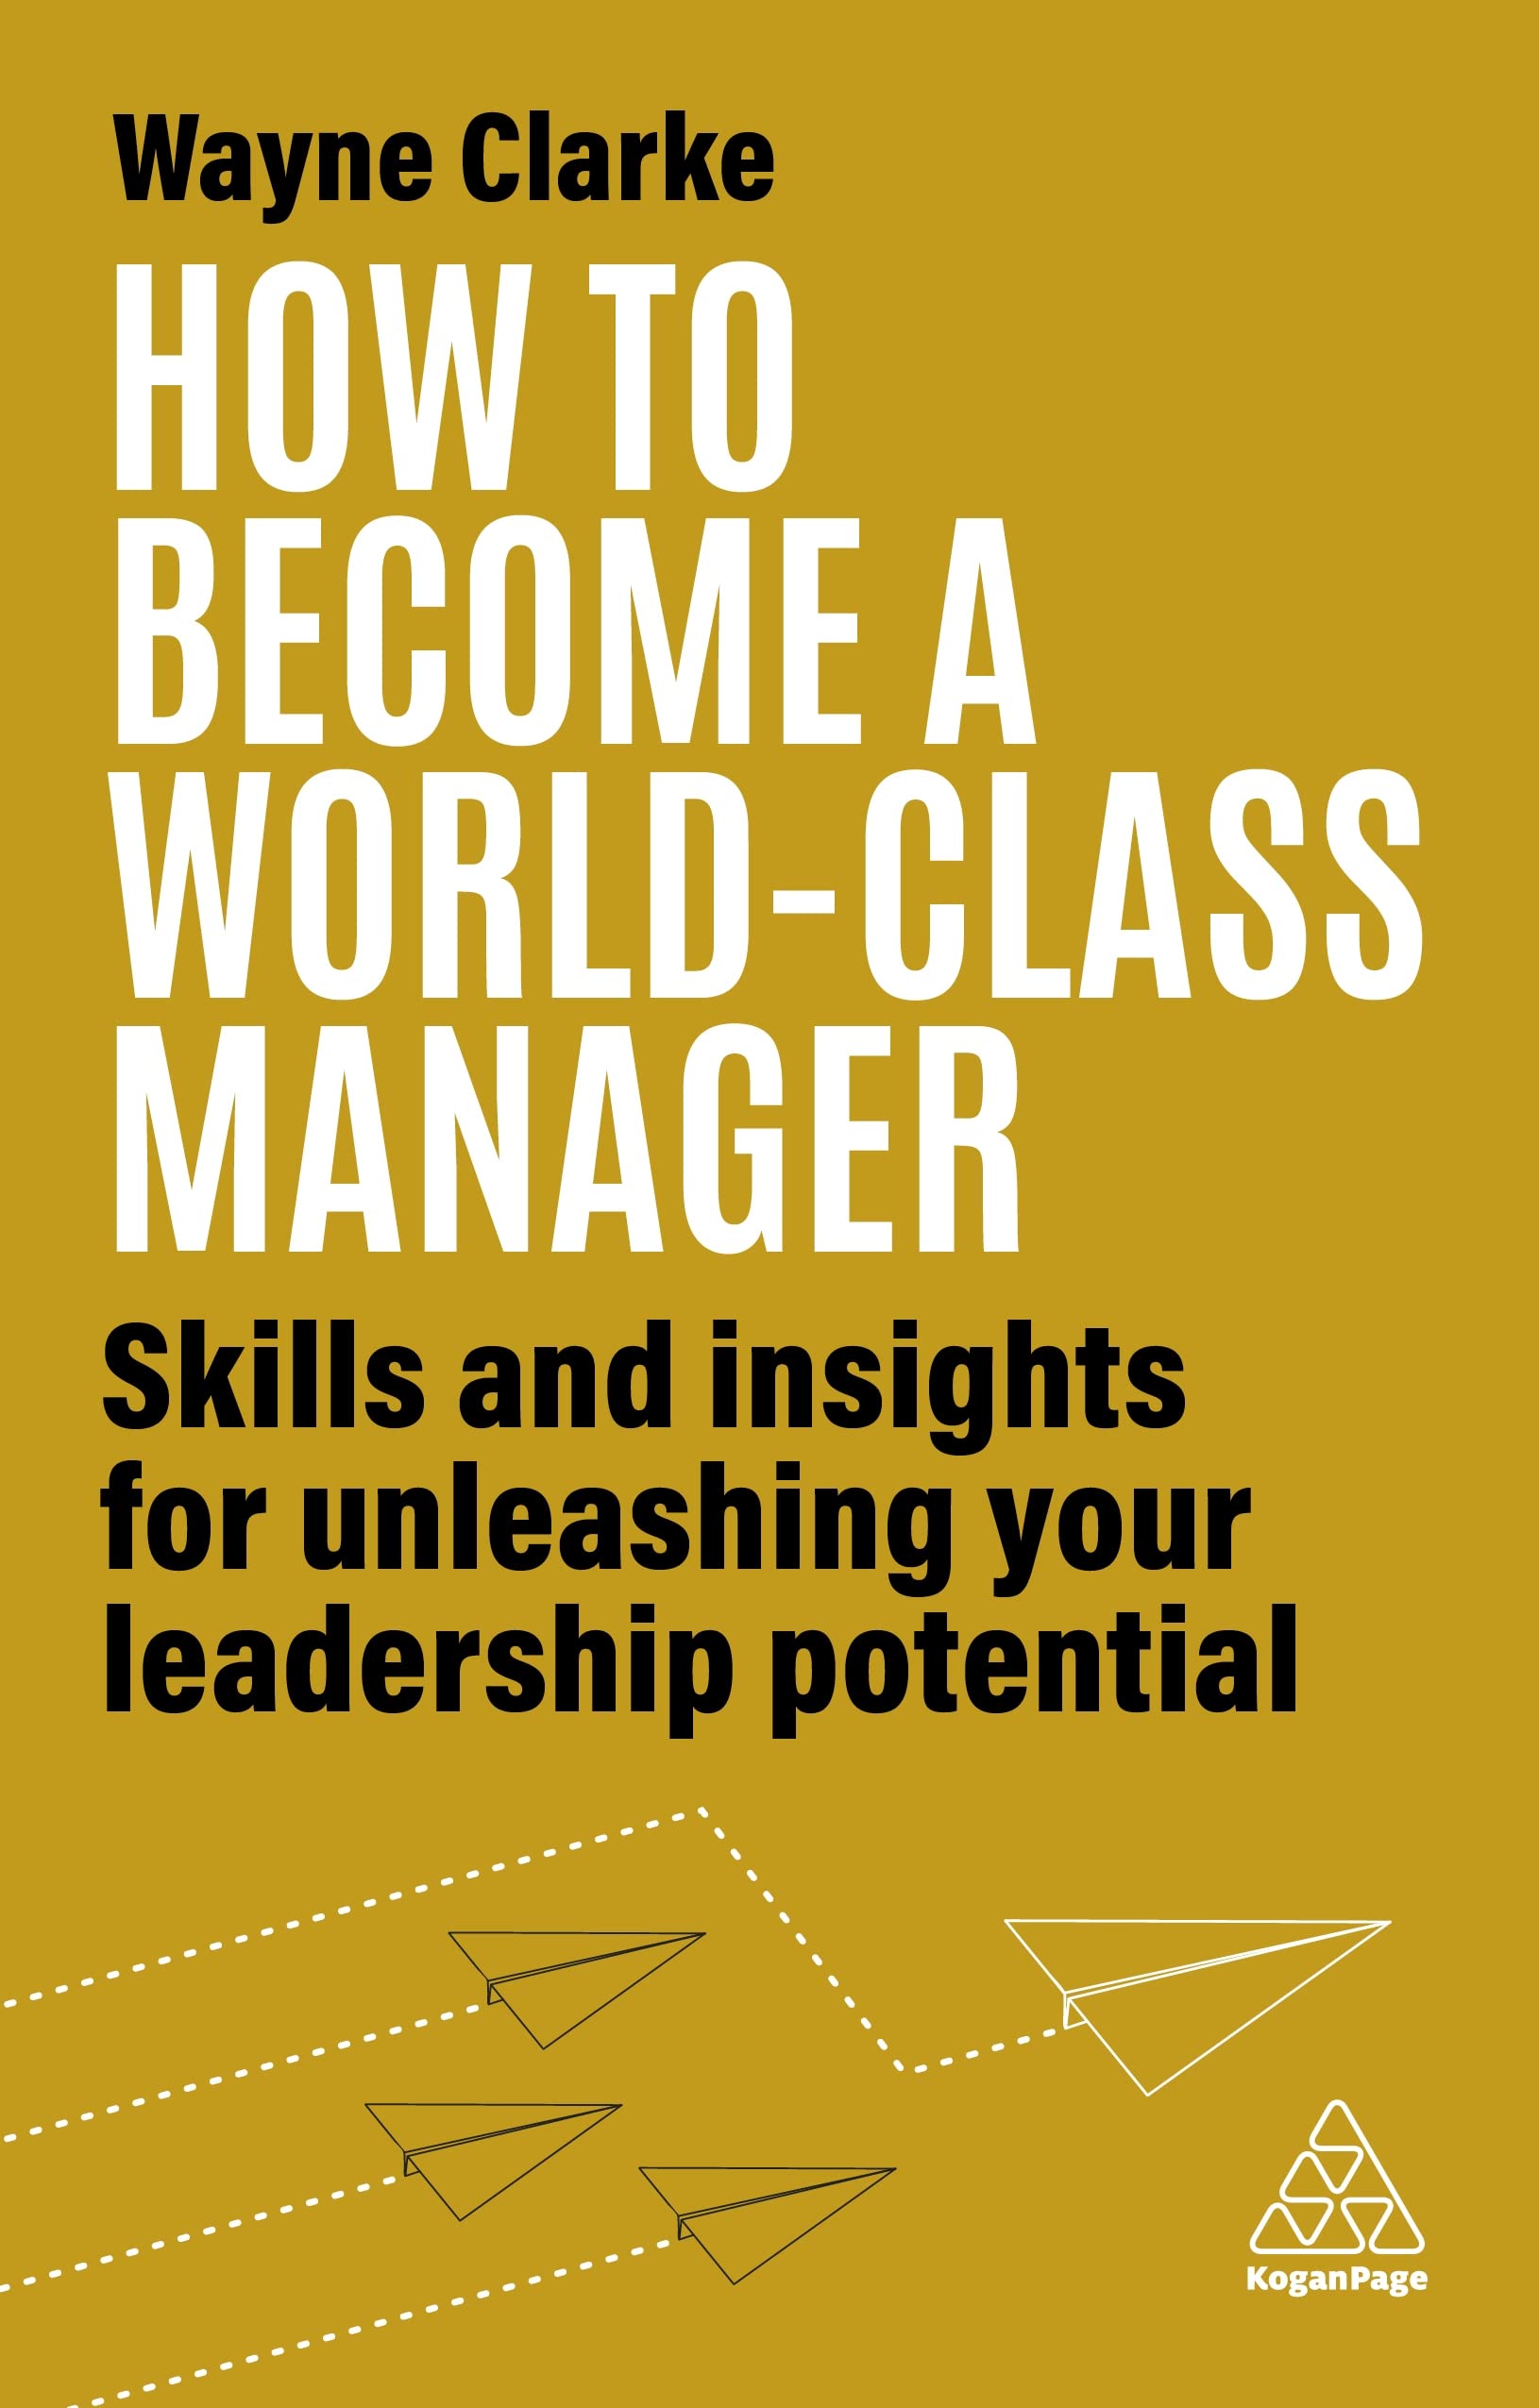 How to Become a World-Class Manager | Wayne Clarke